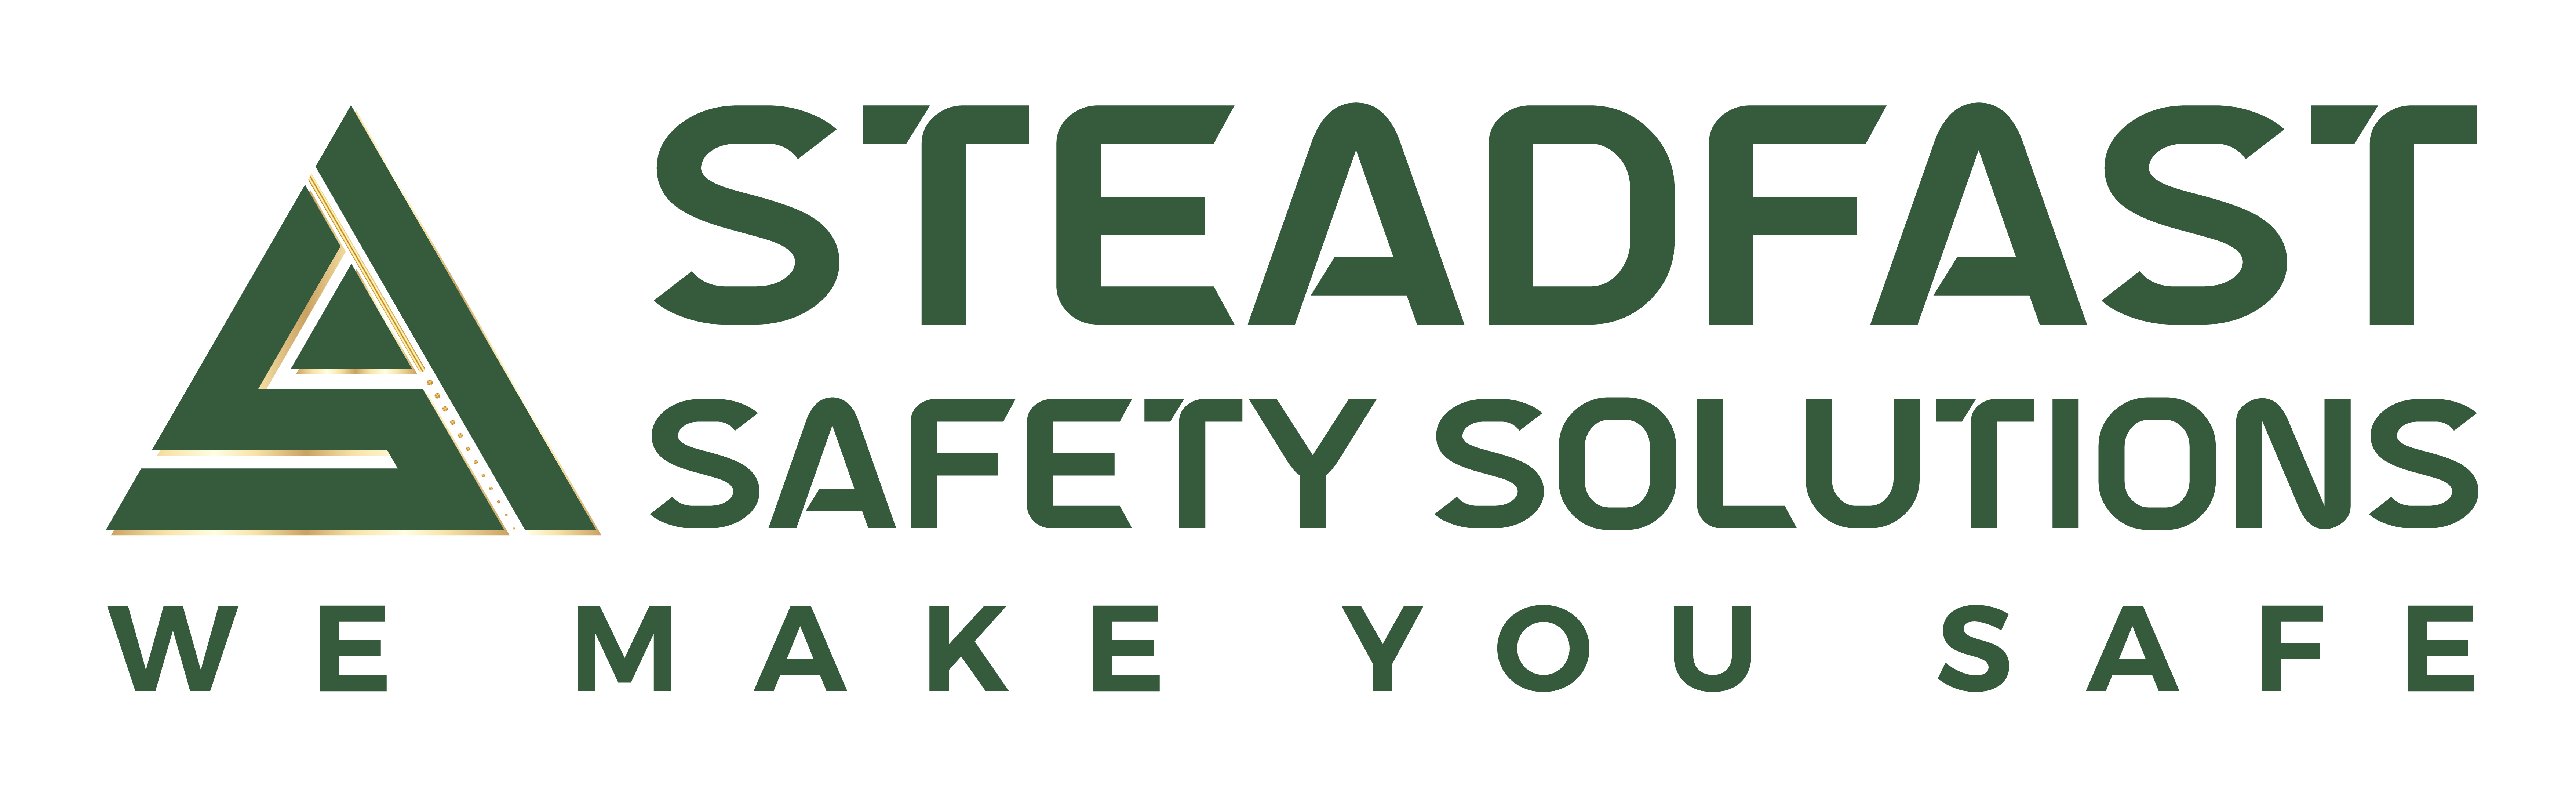 Steadfast Safety Solutions